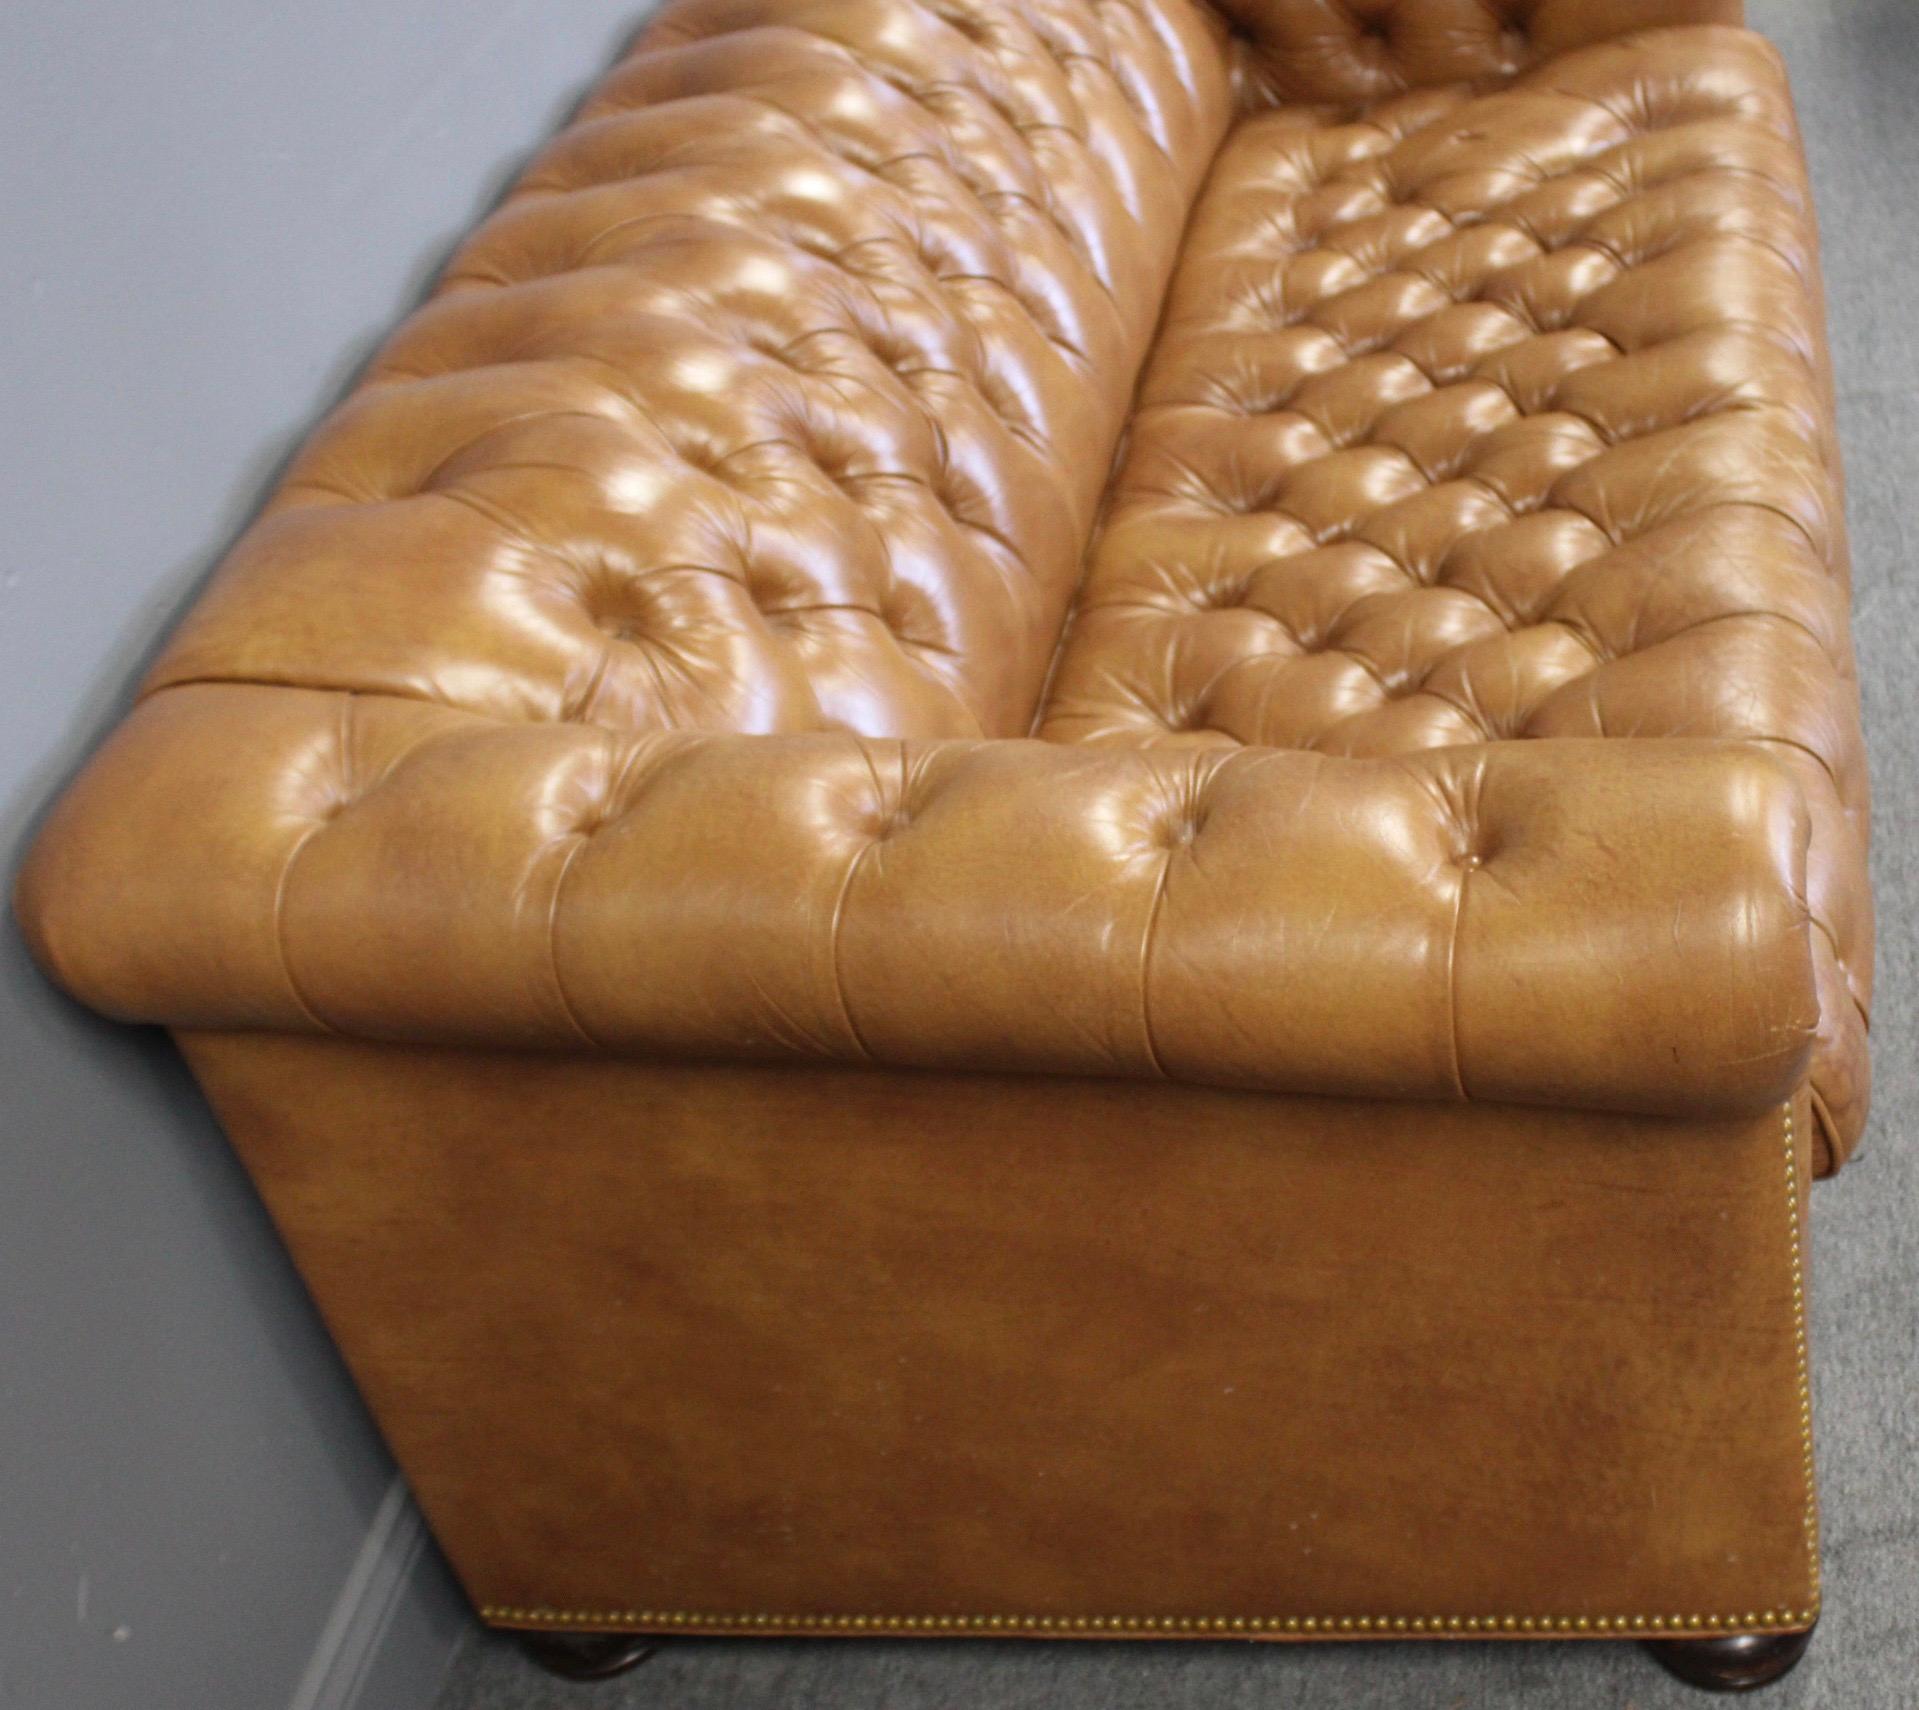 Handsome caramel colored leather chesterfield sleeper sofa with nailhead trim and tufted leather throughout. This vintage sofa would complement a study, game room or library. Sleeper sofa pulls out to a mattress that is 58” wide. Leather has that